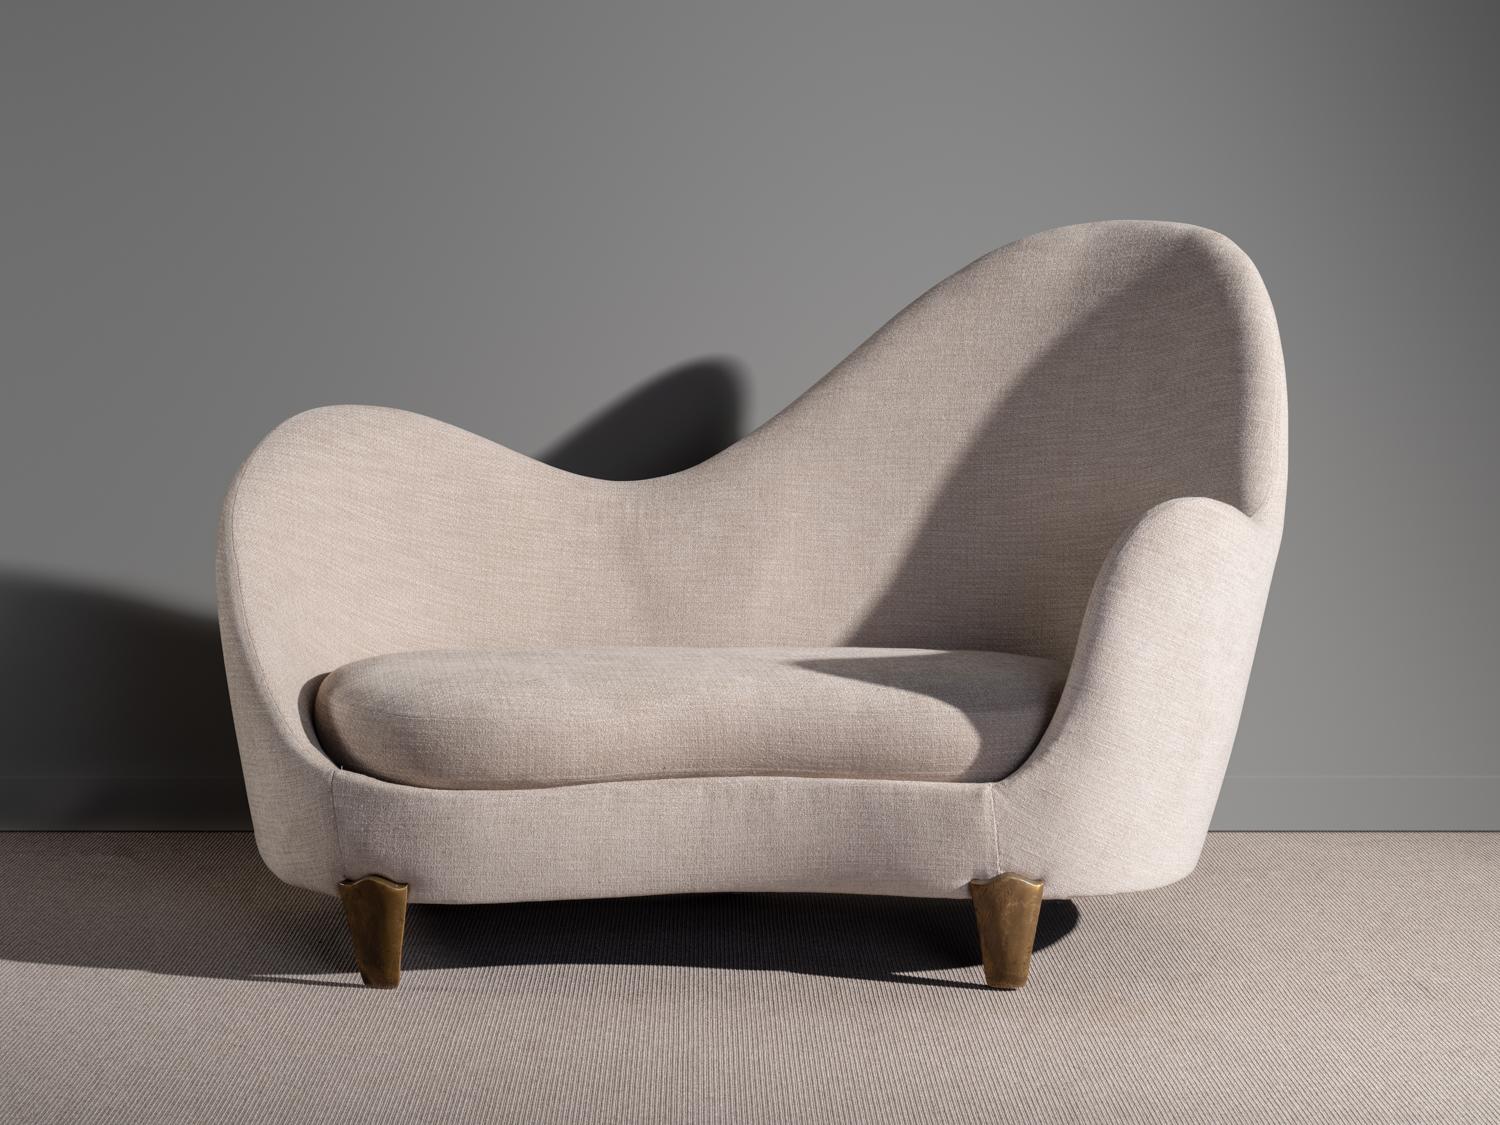 Sofa with asymmetrical arm- and backrests, upholstered in a beige, tightly woven boucle fabric. Model 